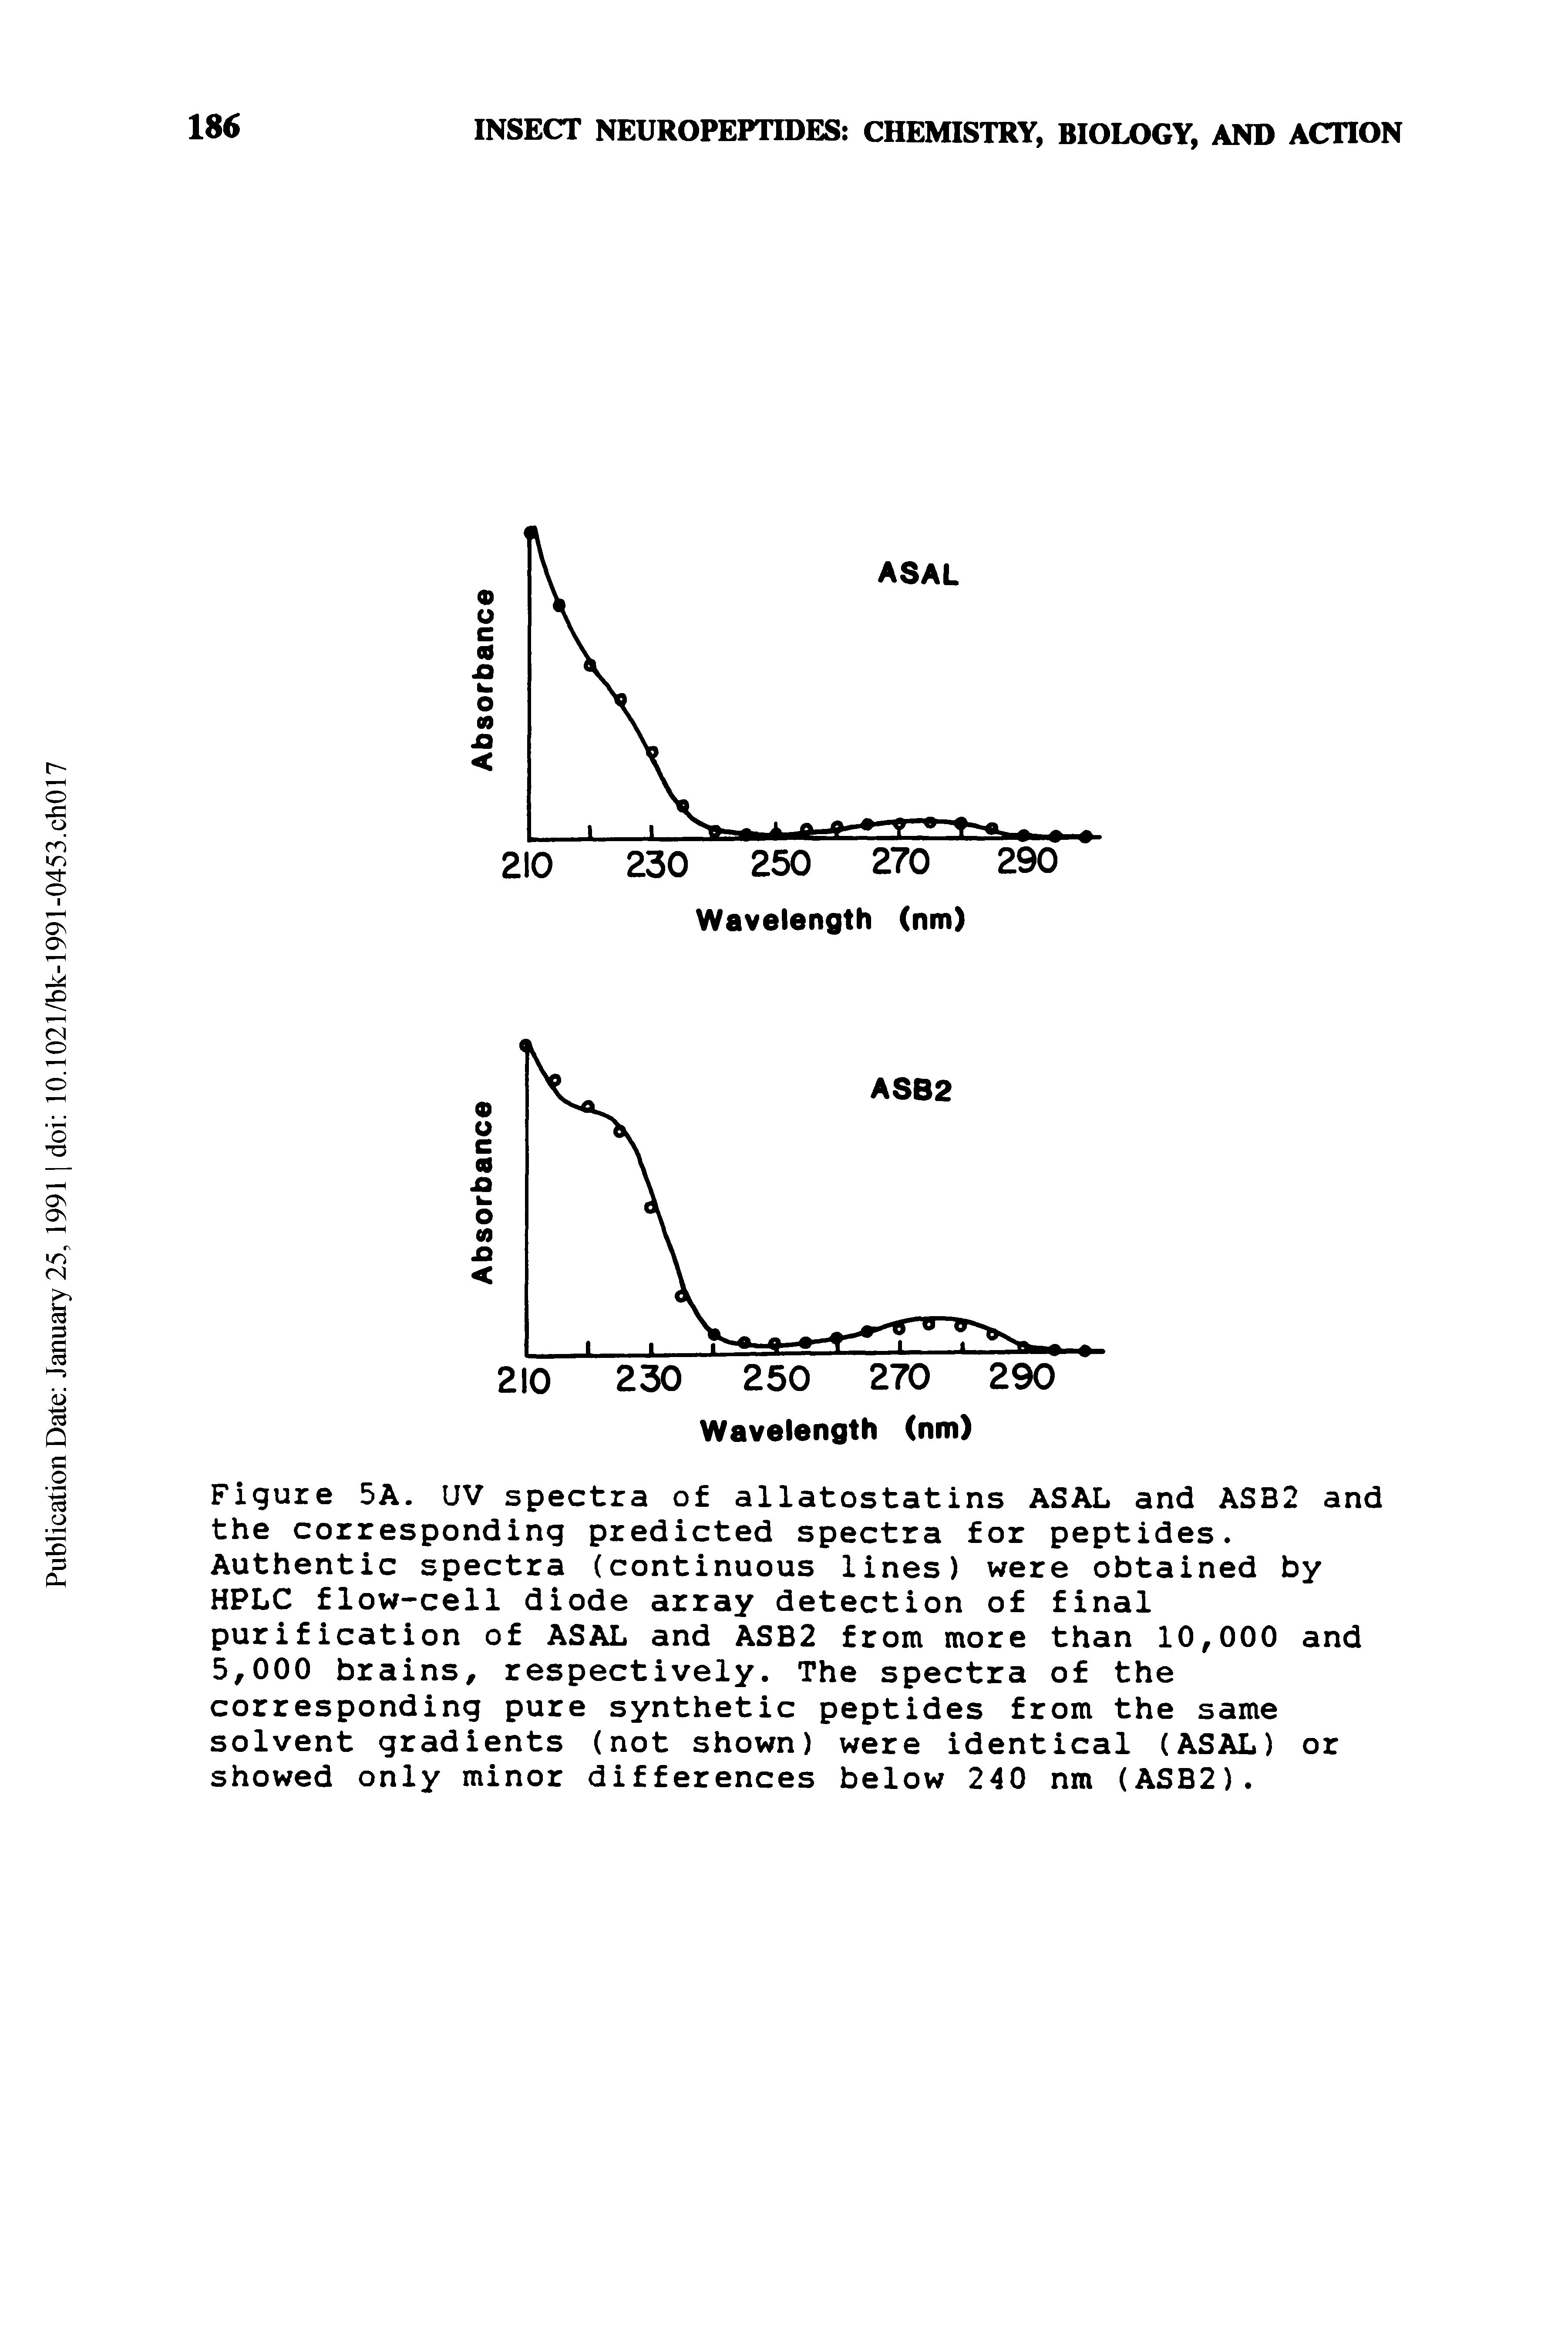 Figure 5A. UV spectra of allatostatins ASAL and ASB2 and the corresponding predicted spectra for peptides. Authentic spectra (continuous lines) were obtained by HPLC flow-cell diode array detection of final purification of ASAL and ASB2 from more than 10,000 and 5,000 brains, respectively. The spectra of the corresponding pure synthetic peptides from the same solvent gradients (not shown) were identical (ASAL) or showed only minor differences below 240 nm (ASB2).